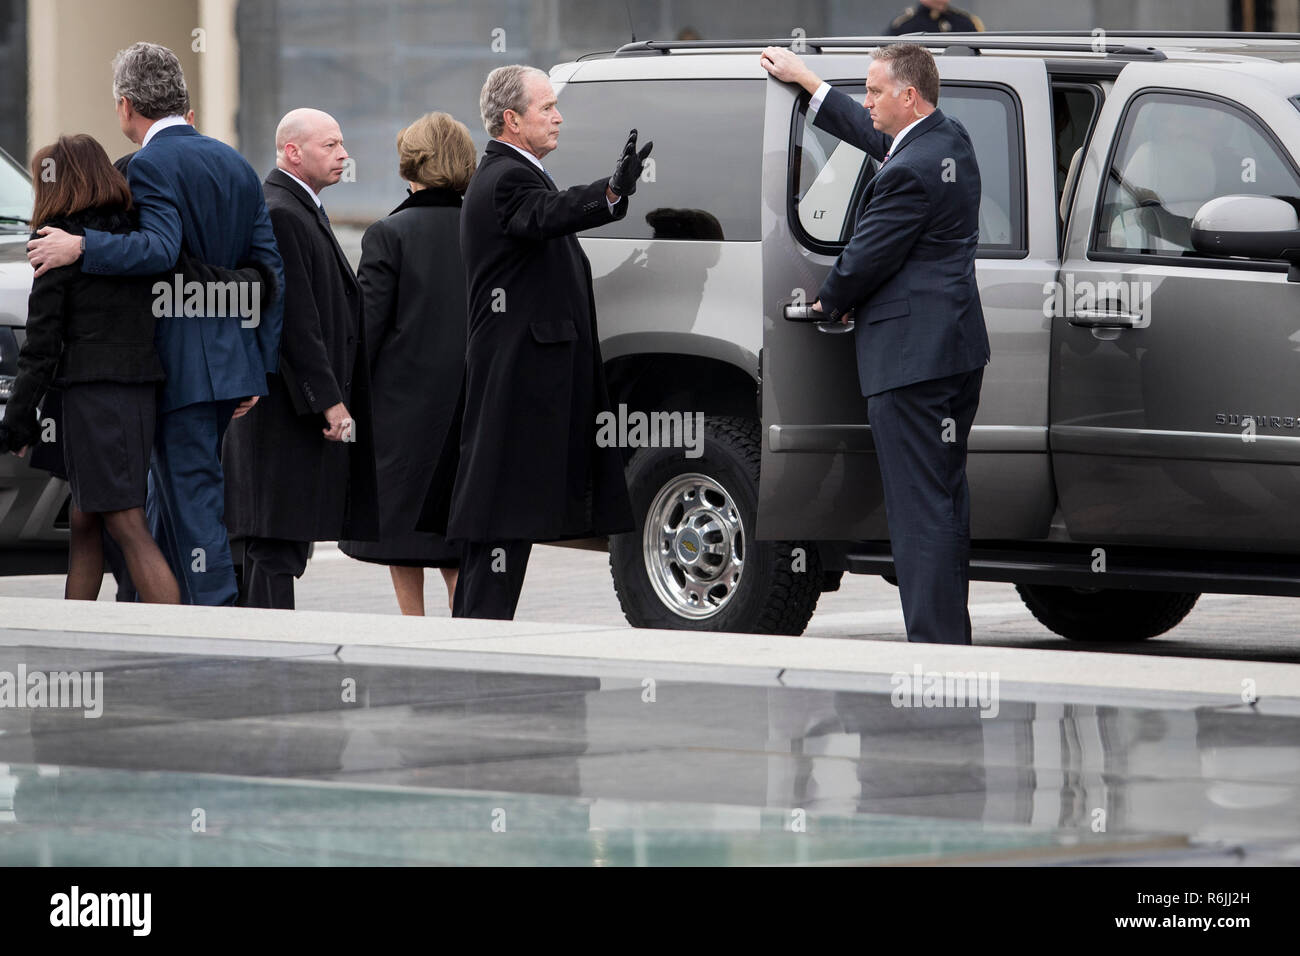 Former President George W. Bush waves to the crowd gathered to view the remains of President George H.W. Bush be transported from the U.S. Capitol to the National Cathedral Wednesday December 5, 2018.  Credit: Sarah Silbiger / Pool via CNP | usage worldwide Stock Photo